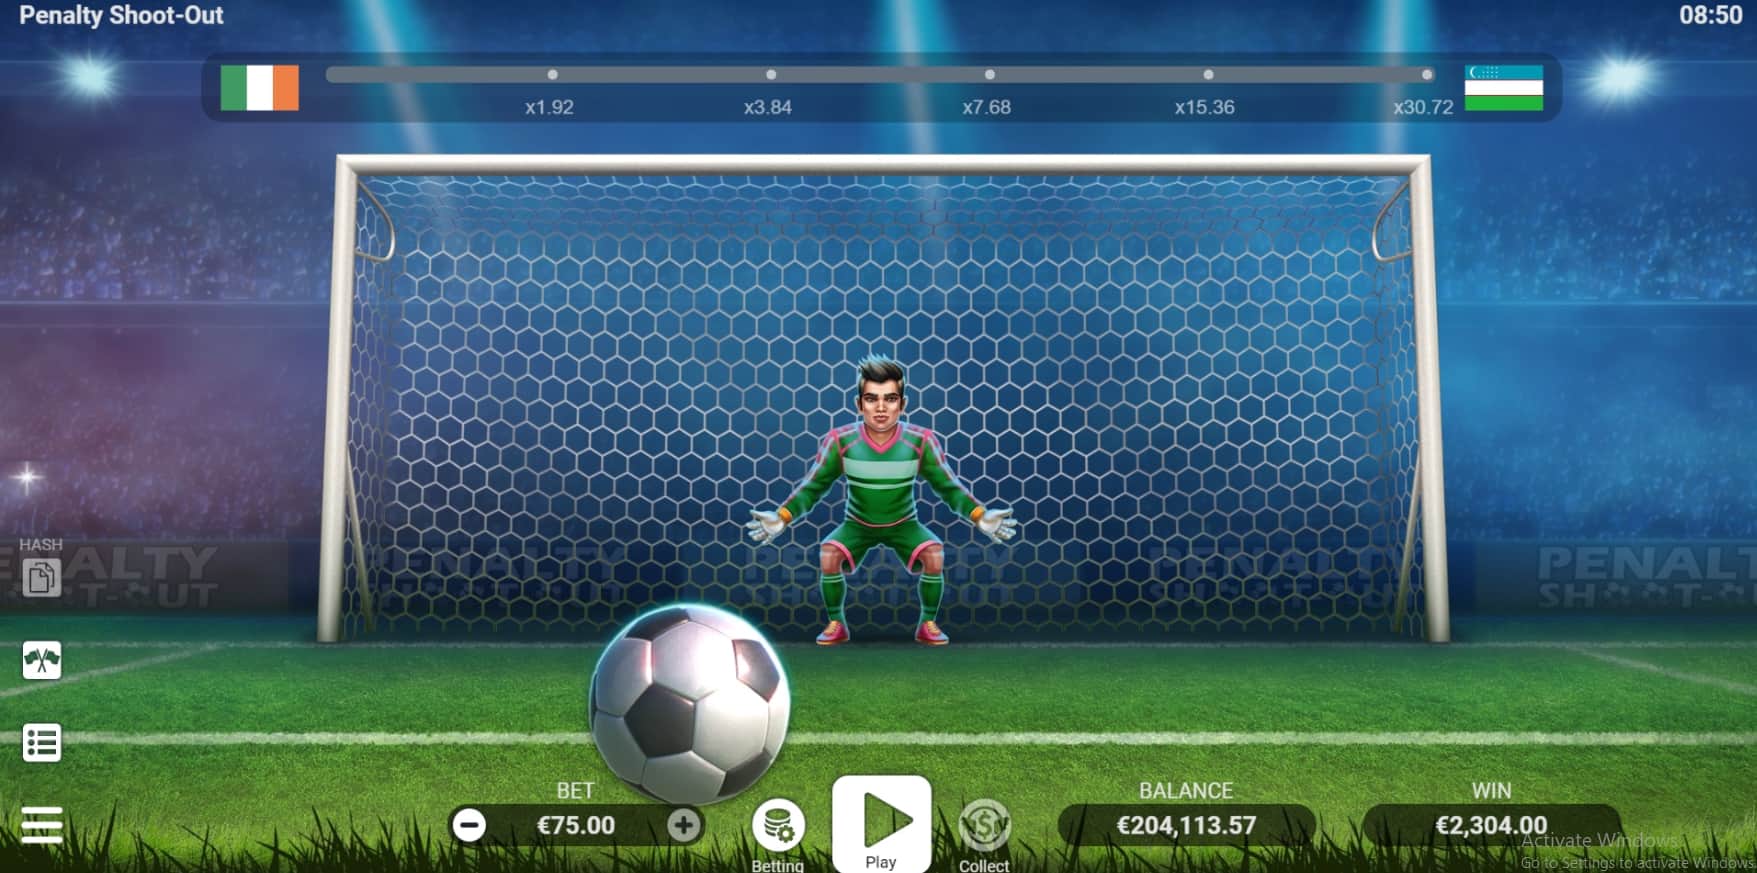 Penalty Shoot-out Evoplay pgslot ฟรีเครดิต